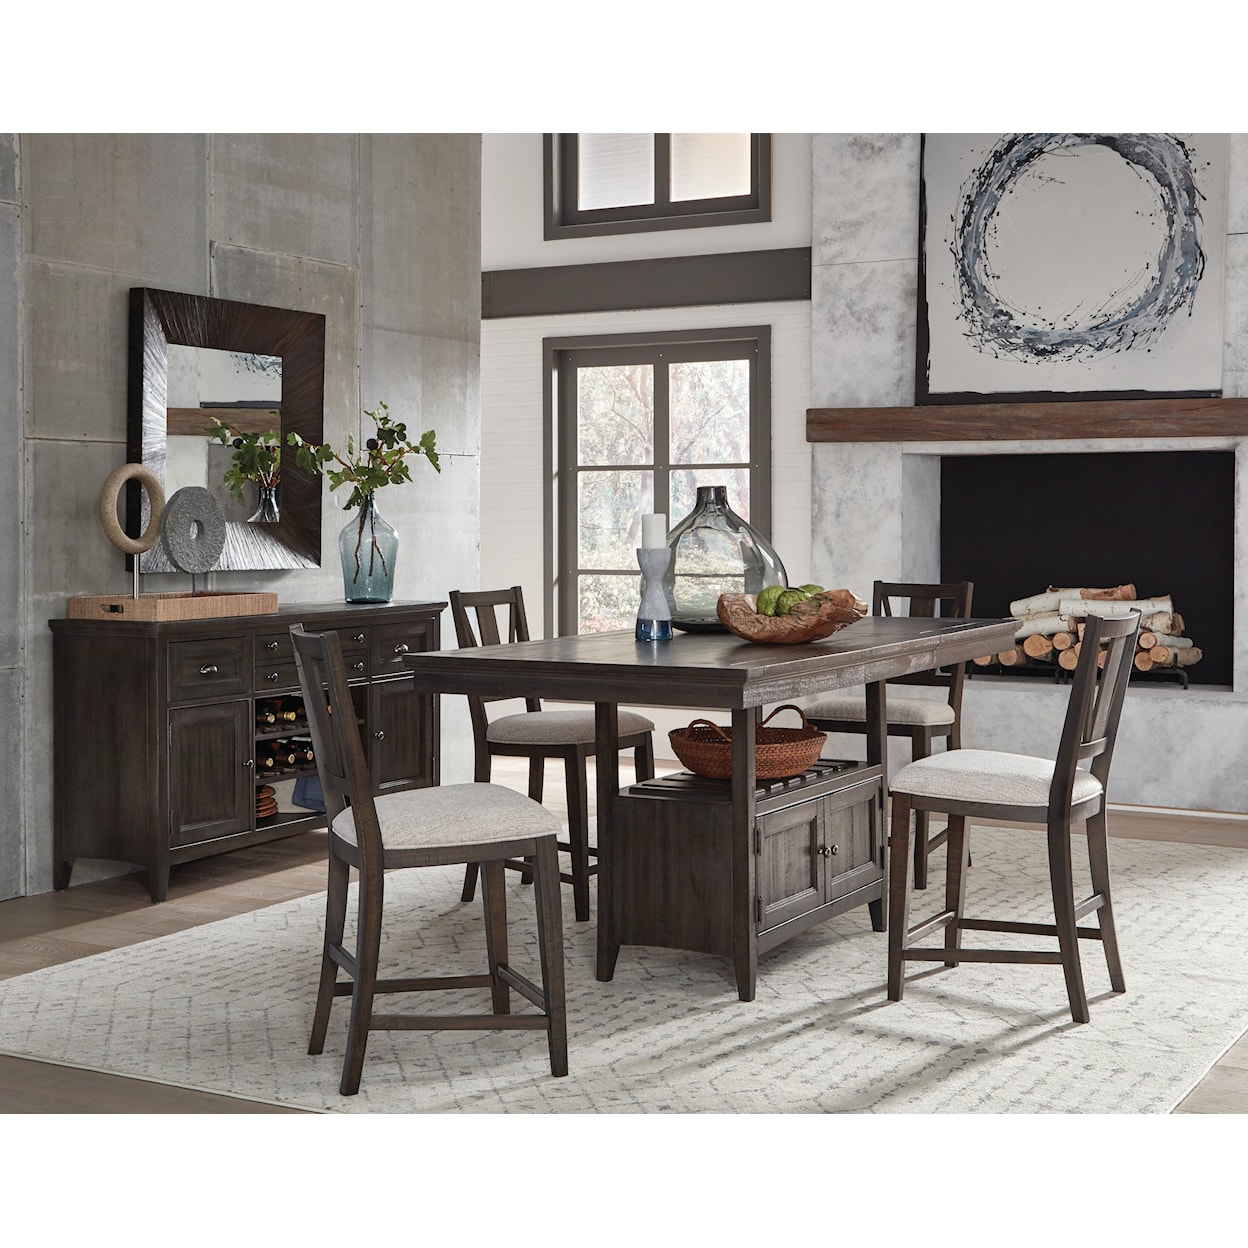 Magnussen Home Westley Falls Dining 5-Piece Counter Height Dining Set